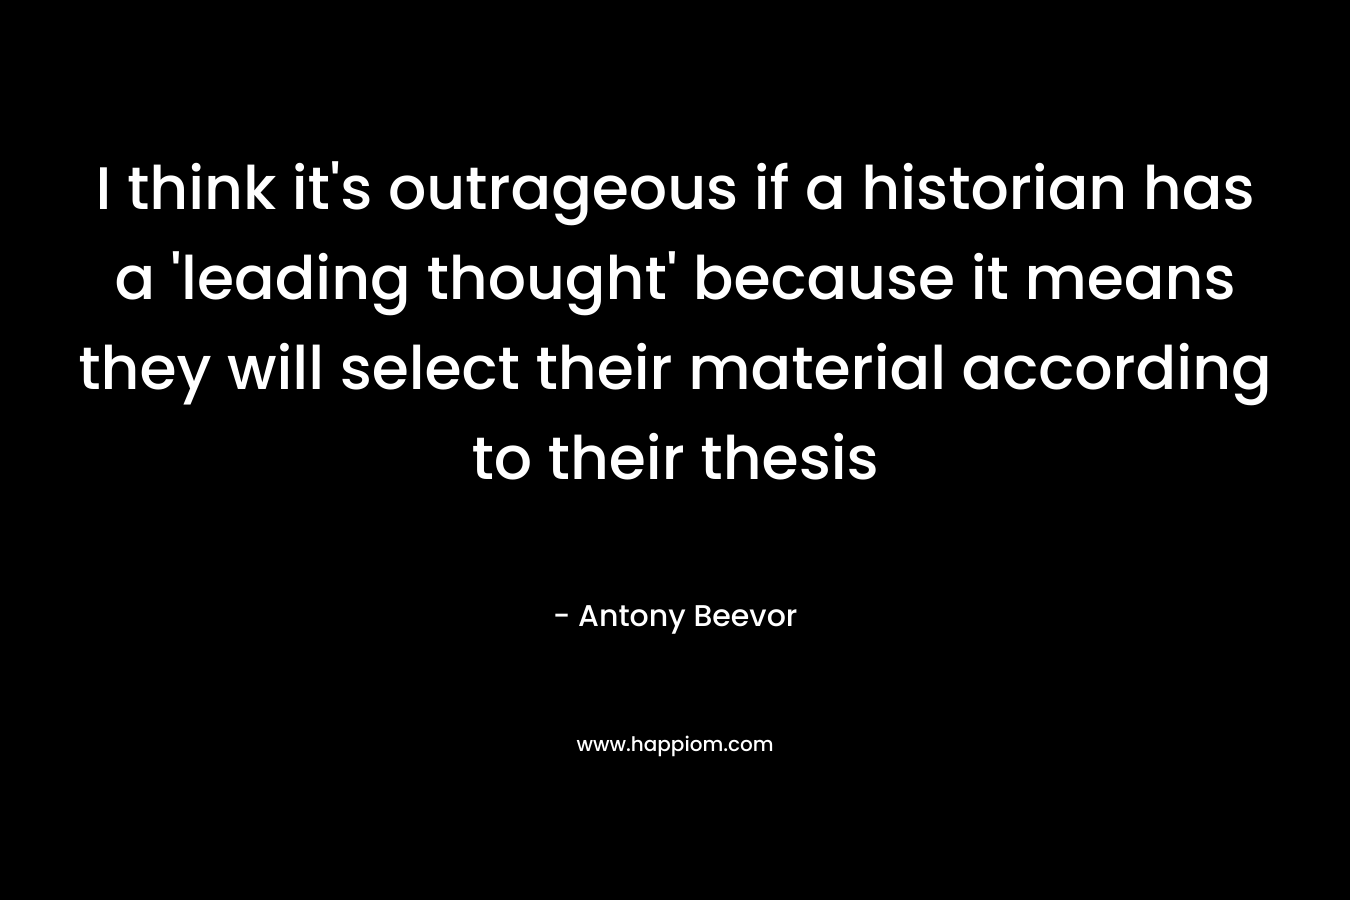 I think it’s outrageous if a historian has a ‘leading thought’ because it means they will select their material according to their thesis – Antony Beevor